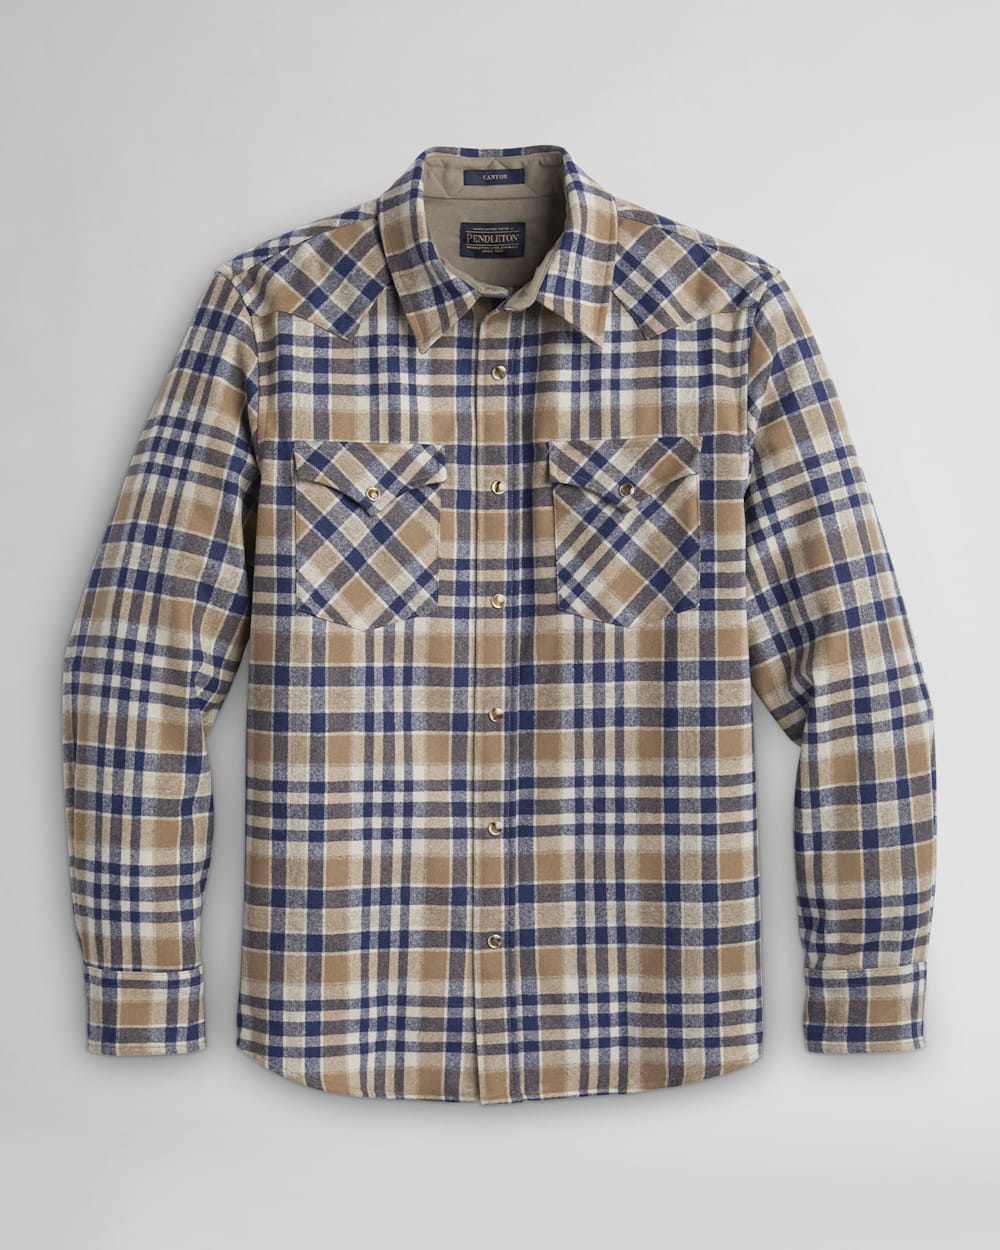 MEN'S PLAID SNAP-FRONT WESTERN CANYON SHIRT IN NAVY/TAN MIX PLAID image number 1